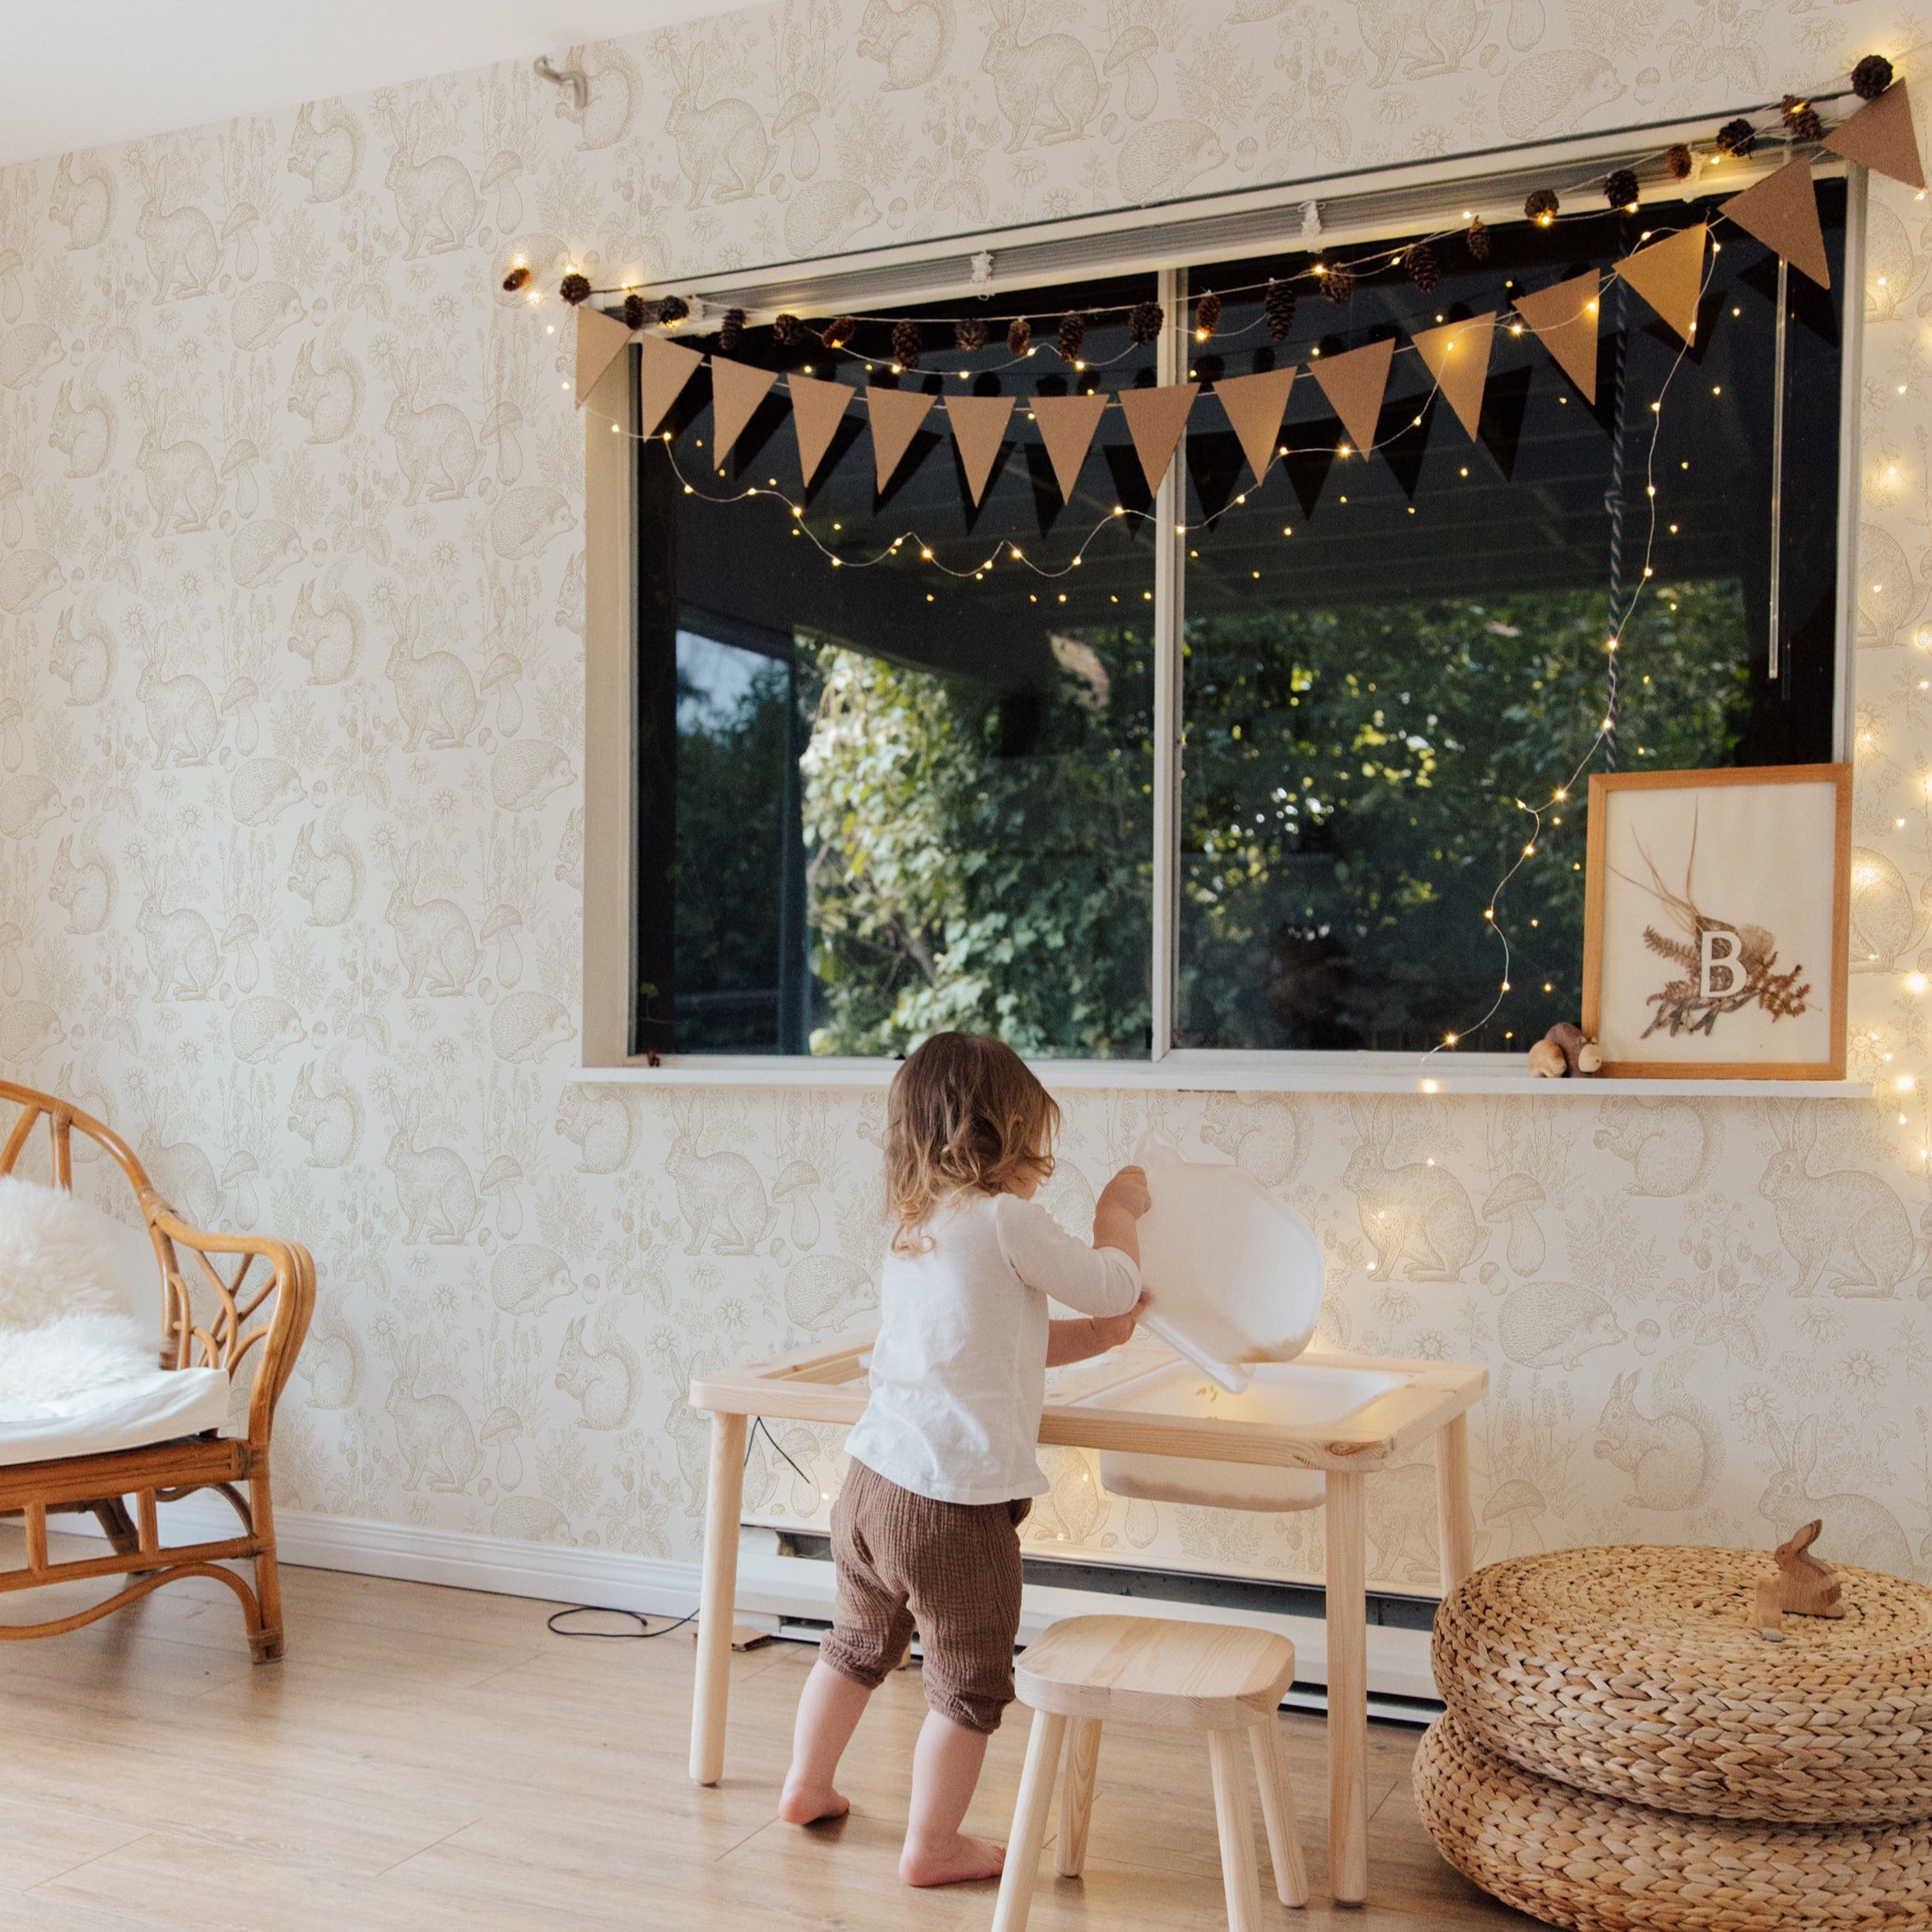 A child's play area against a backdrop of "Woodland Creatures Wallpaper" with playful sketches of rabbits and squirrels. The room features a small wooden table and stools, with a child in a white top and brown pants standing at the window, which is framed with soft drapes and whimsical string lights, creating a magical and kid-friendly environment.